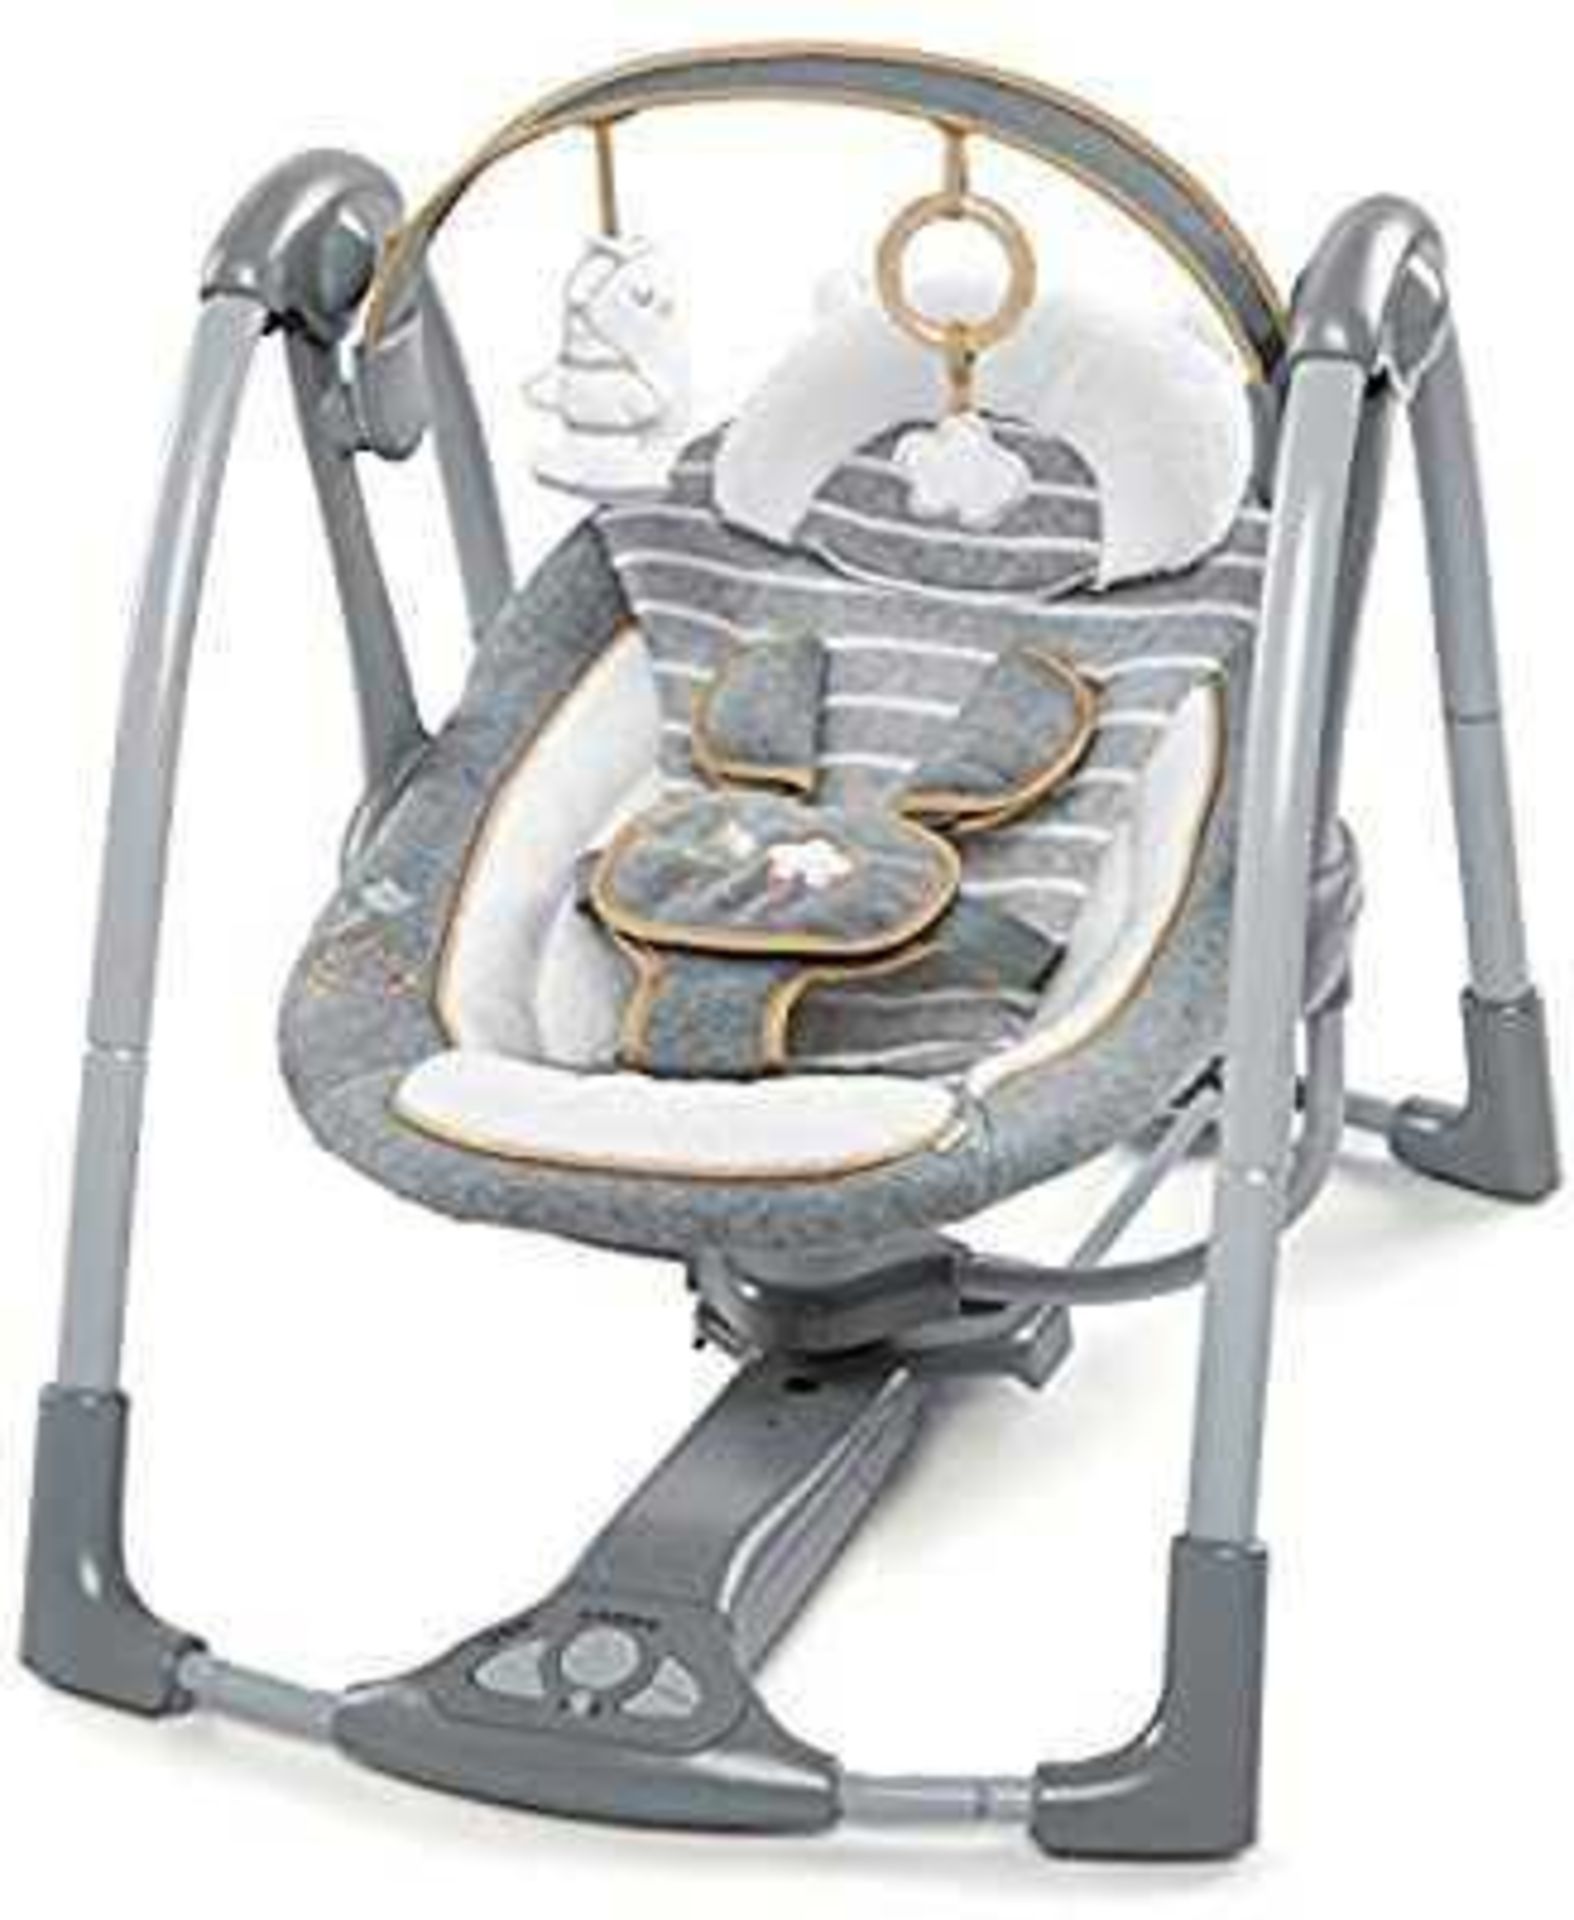 Rrp £80 Boxed Ingenuity Boutique Collection Swing And Go Portable Swing